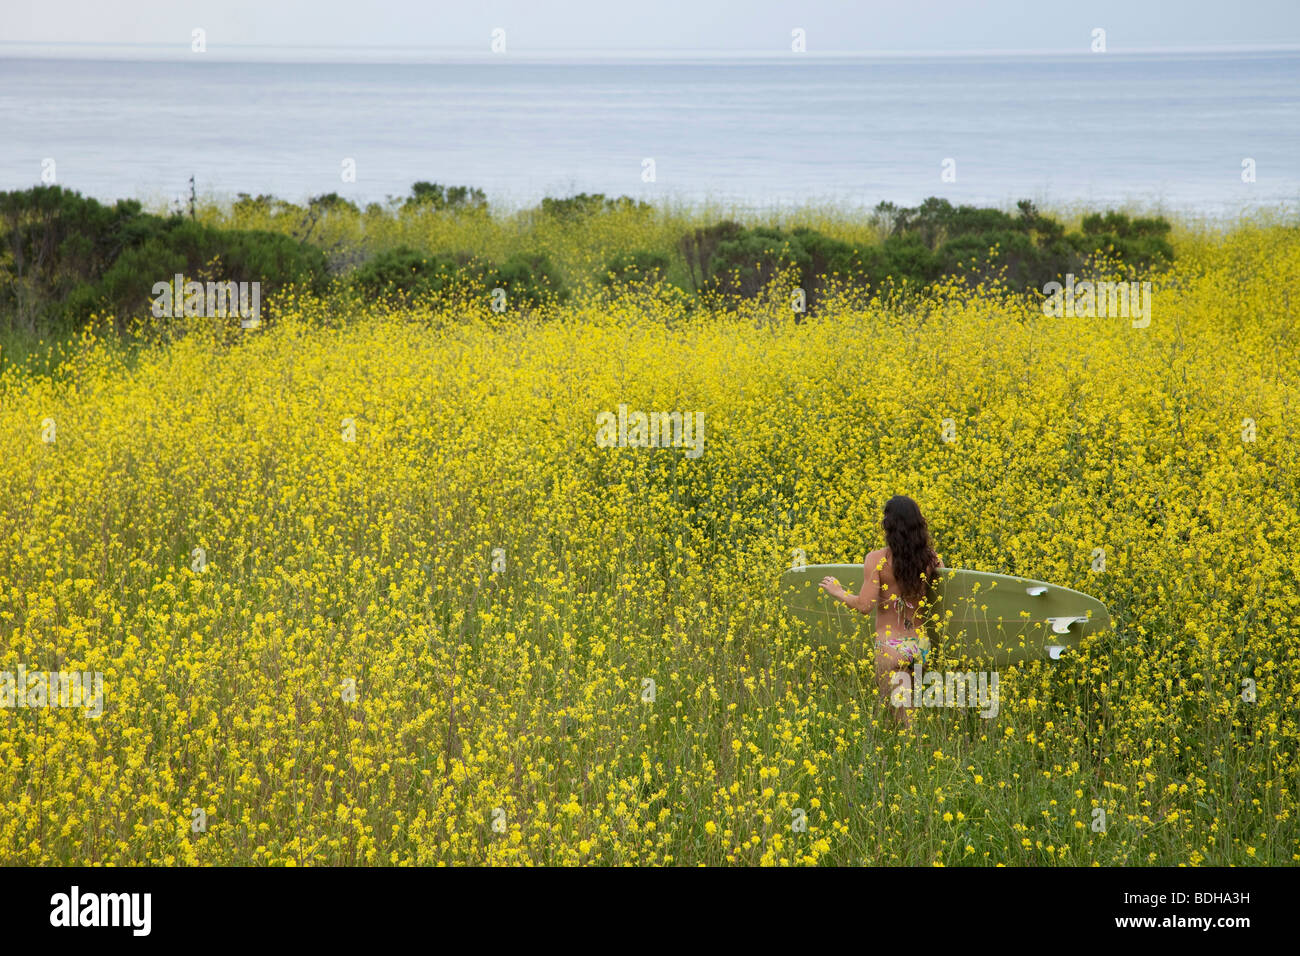 Young woman with her hands outstretched walking to the beach through a field of yellow flowers. Stock Photo